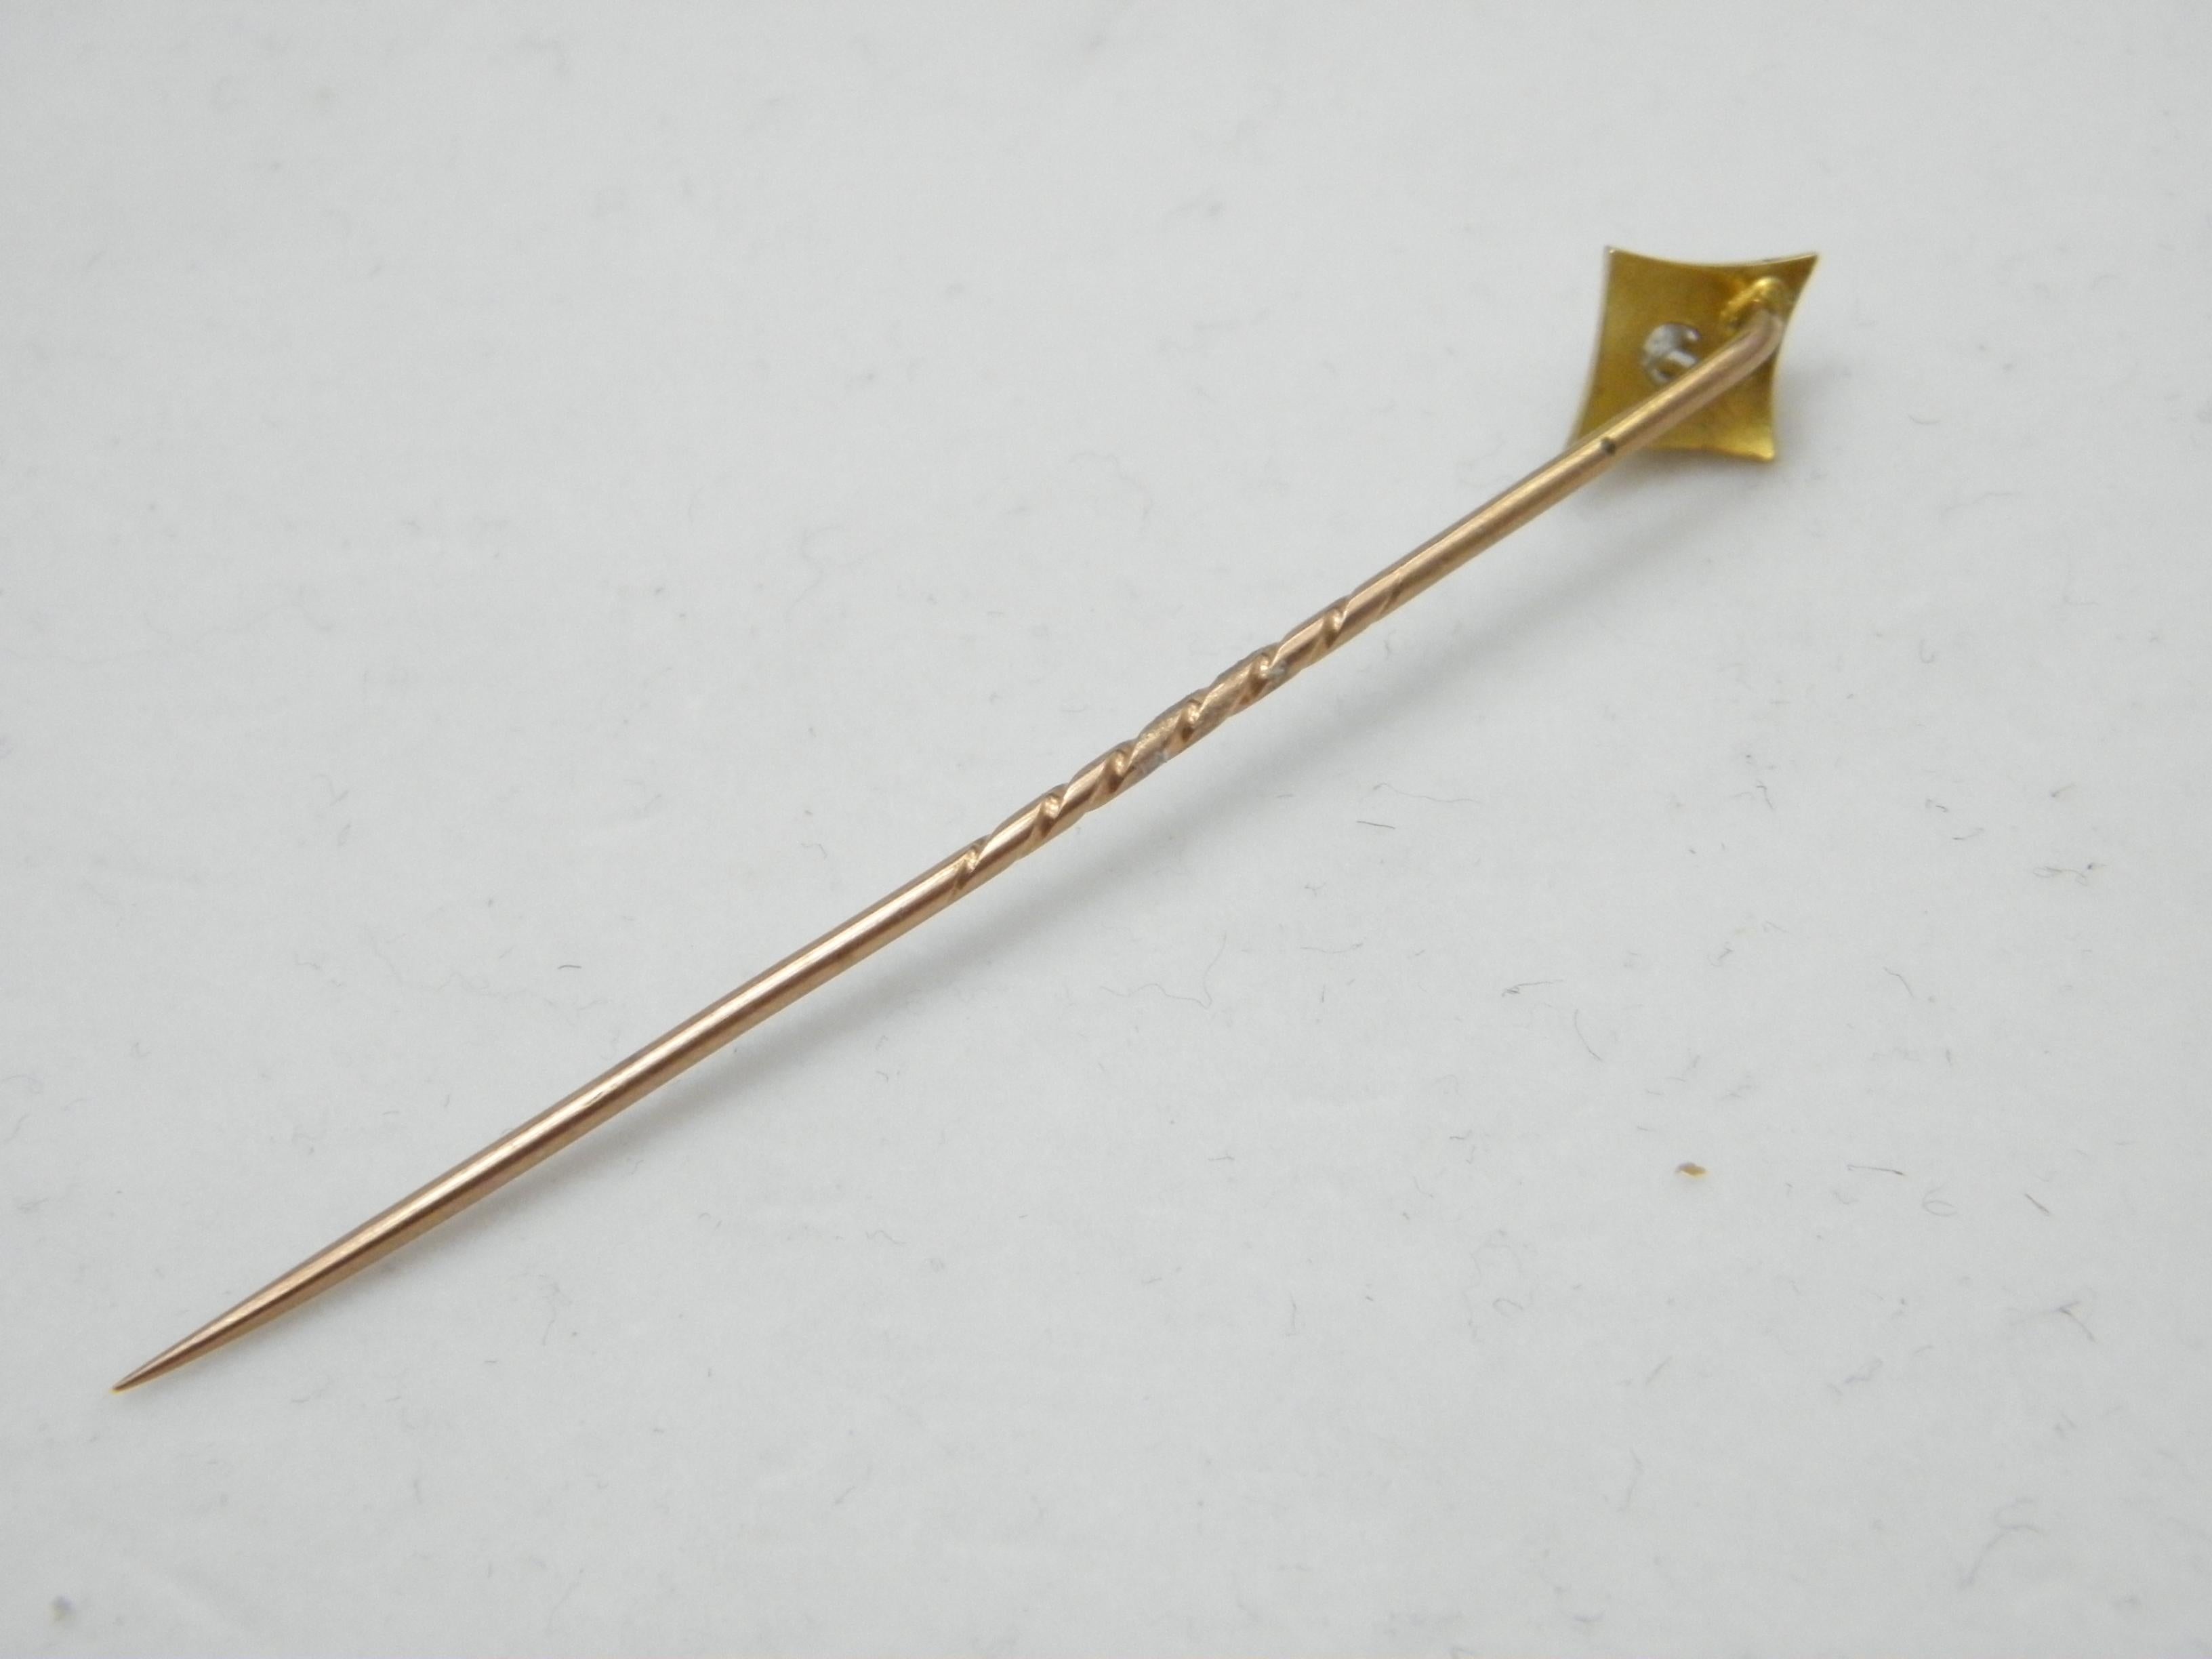 Antique 15ct Gold Diamond Stock Pin Brooch c1860 Heavy 625 Purity Tie Lapel Hat For Sale 3